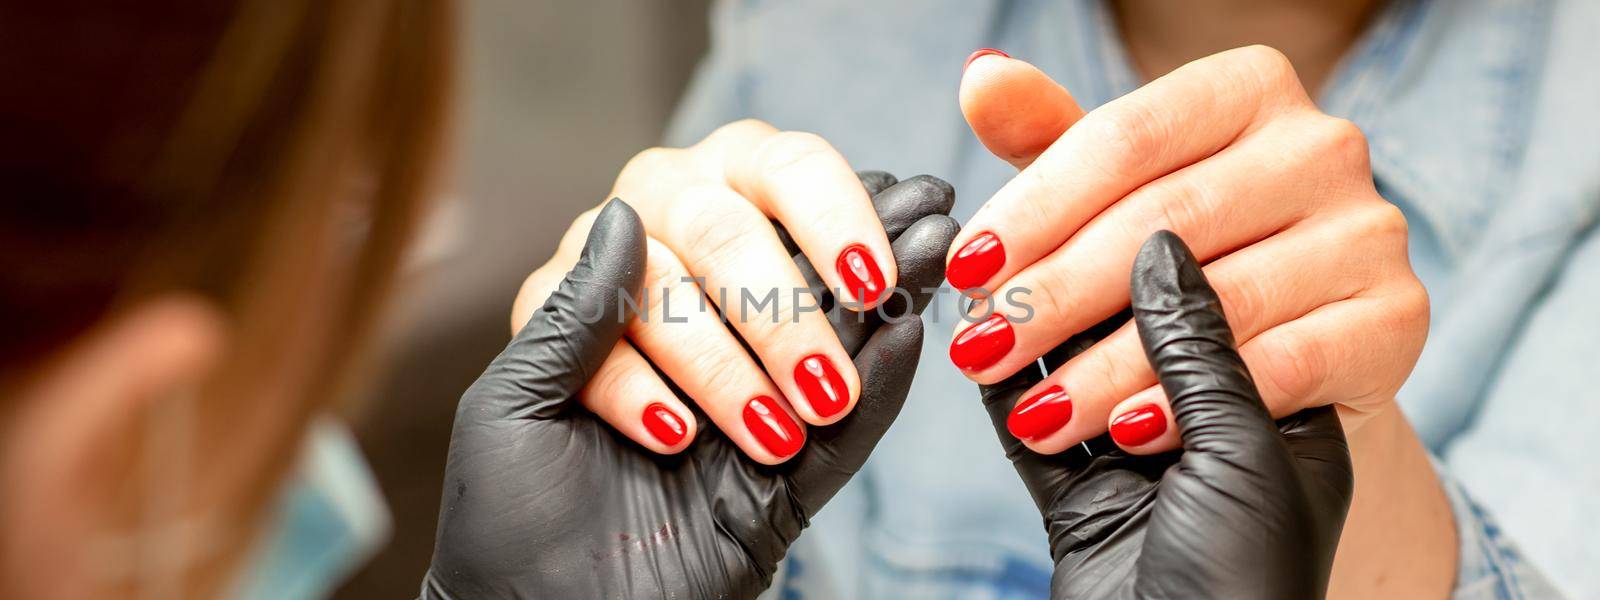 A manicurist holds beautiful young female hands showing finished red polish manicure in a nail salon. by okskukuruza